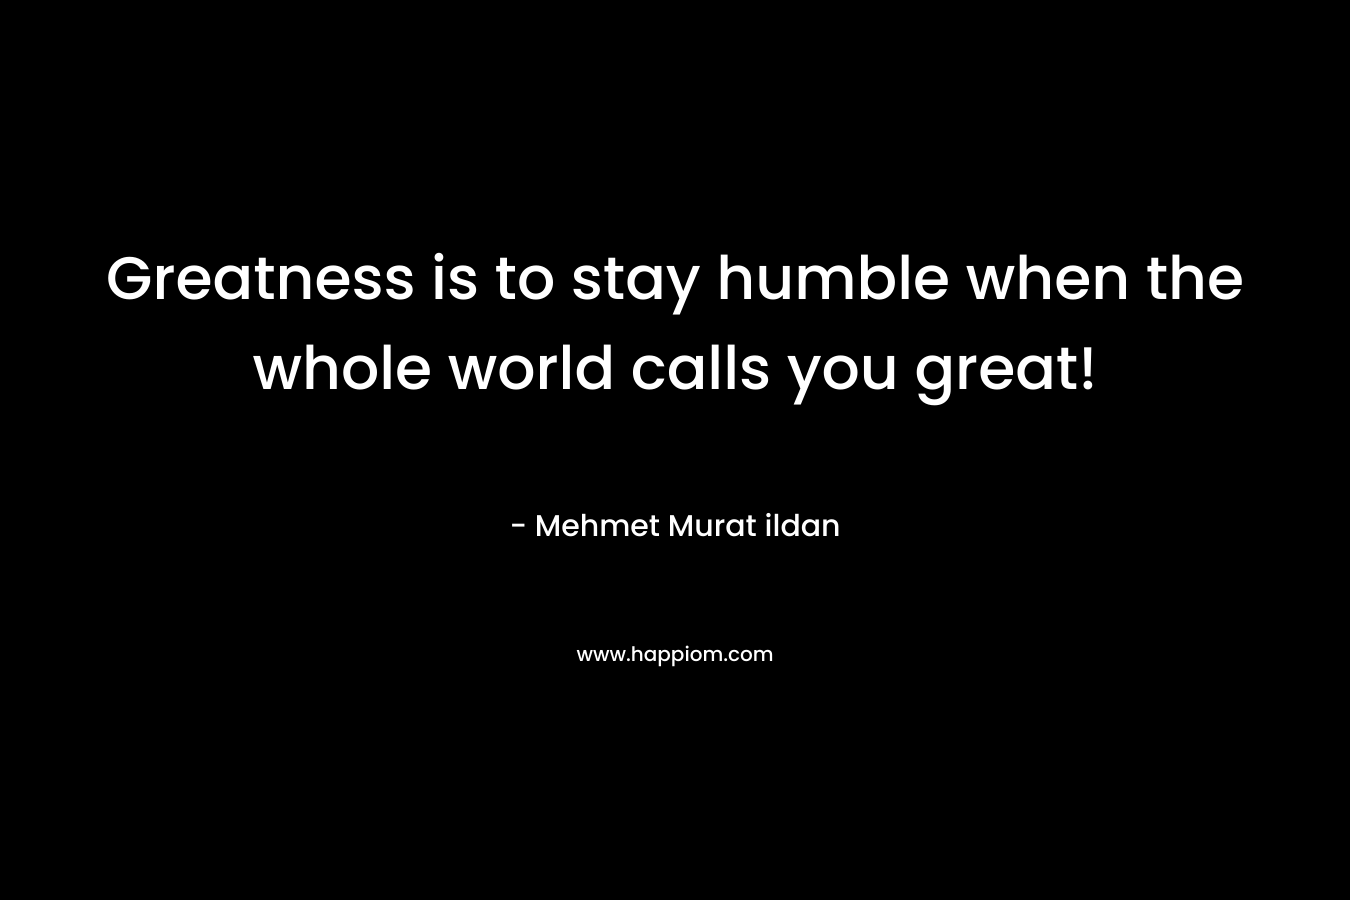 Greatness is to stay humble when the whole world calls you great! – Mehmet Murat ildan